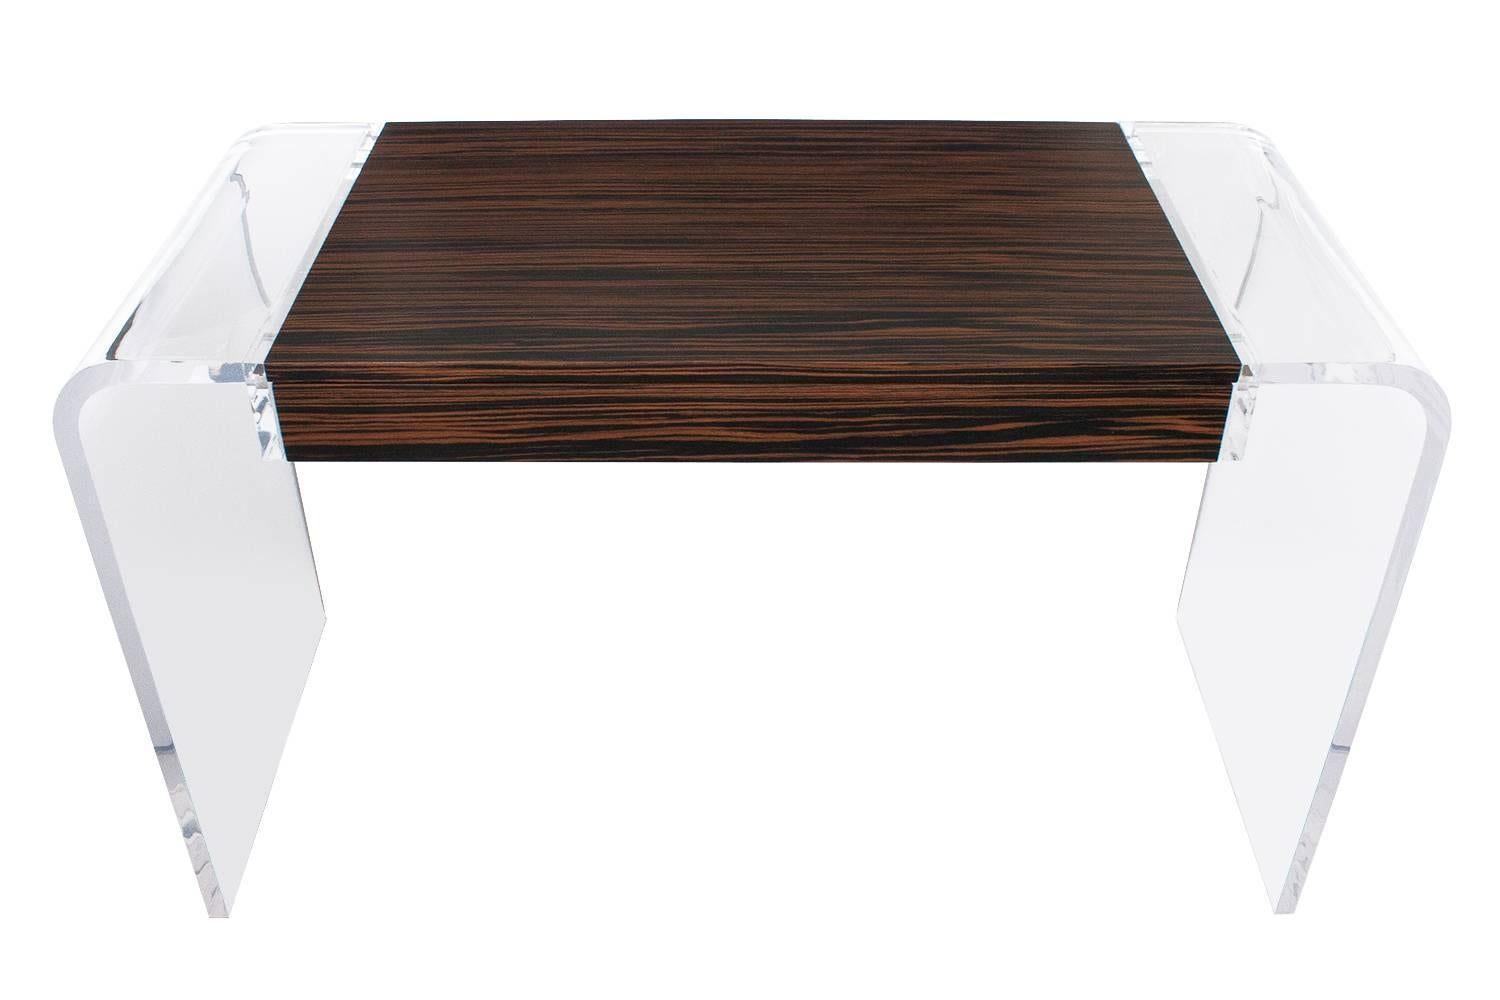 Stunning macassar ebony and lucite floating desk. The piece has a wide variety of uses such as a desk, vanity, writing table or console table.  

A macassar case and drawer are suspended between two one inch thick bent lucite legs. The case